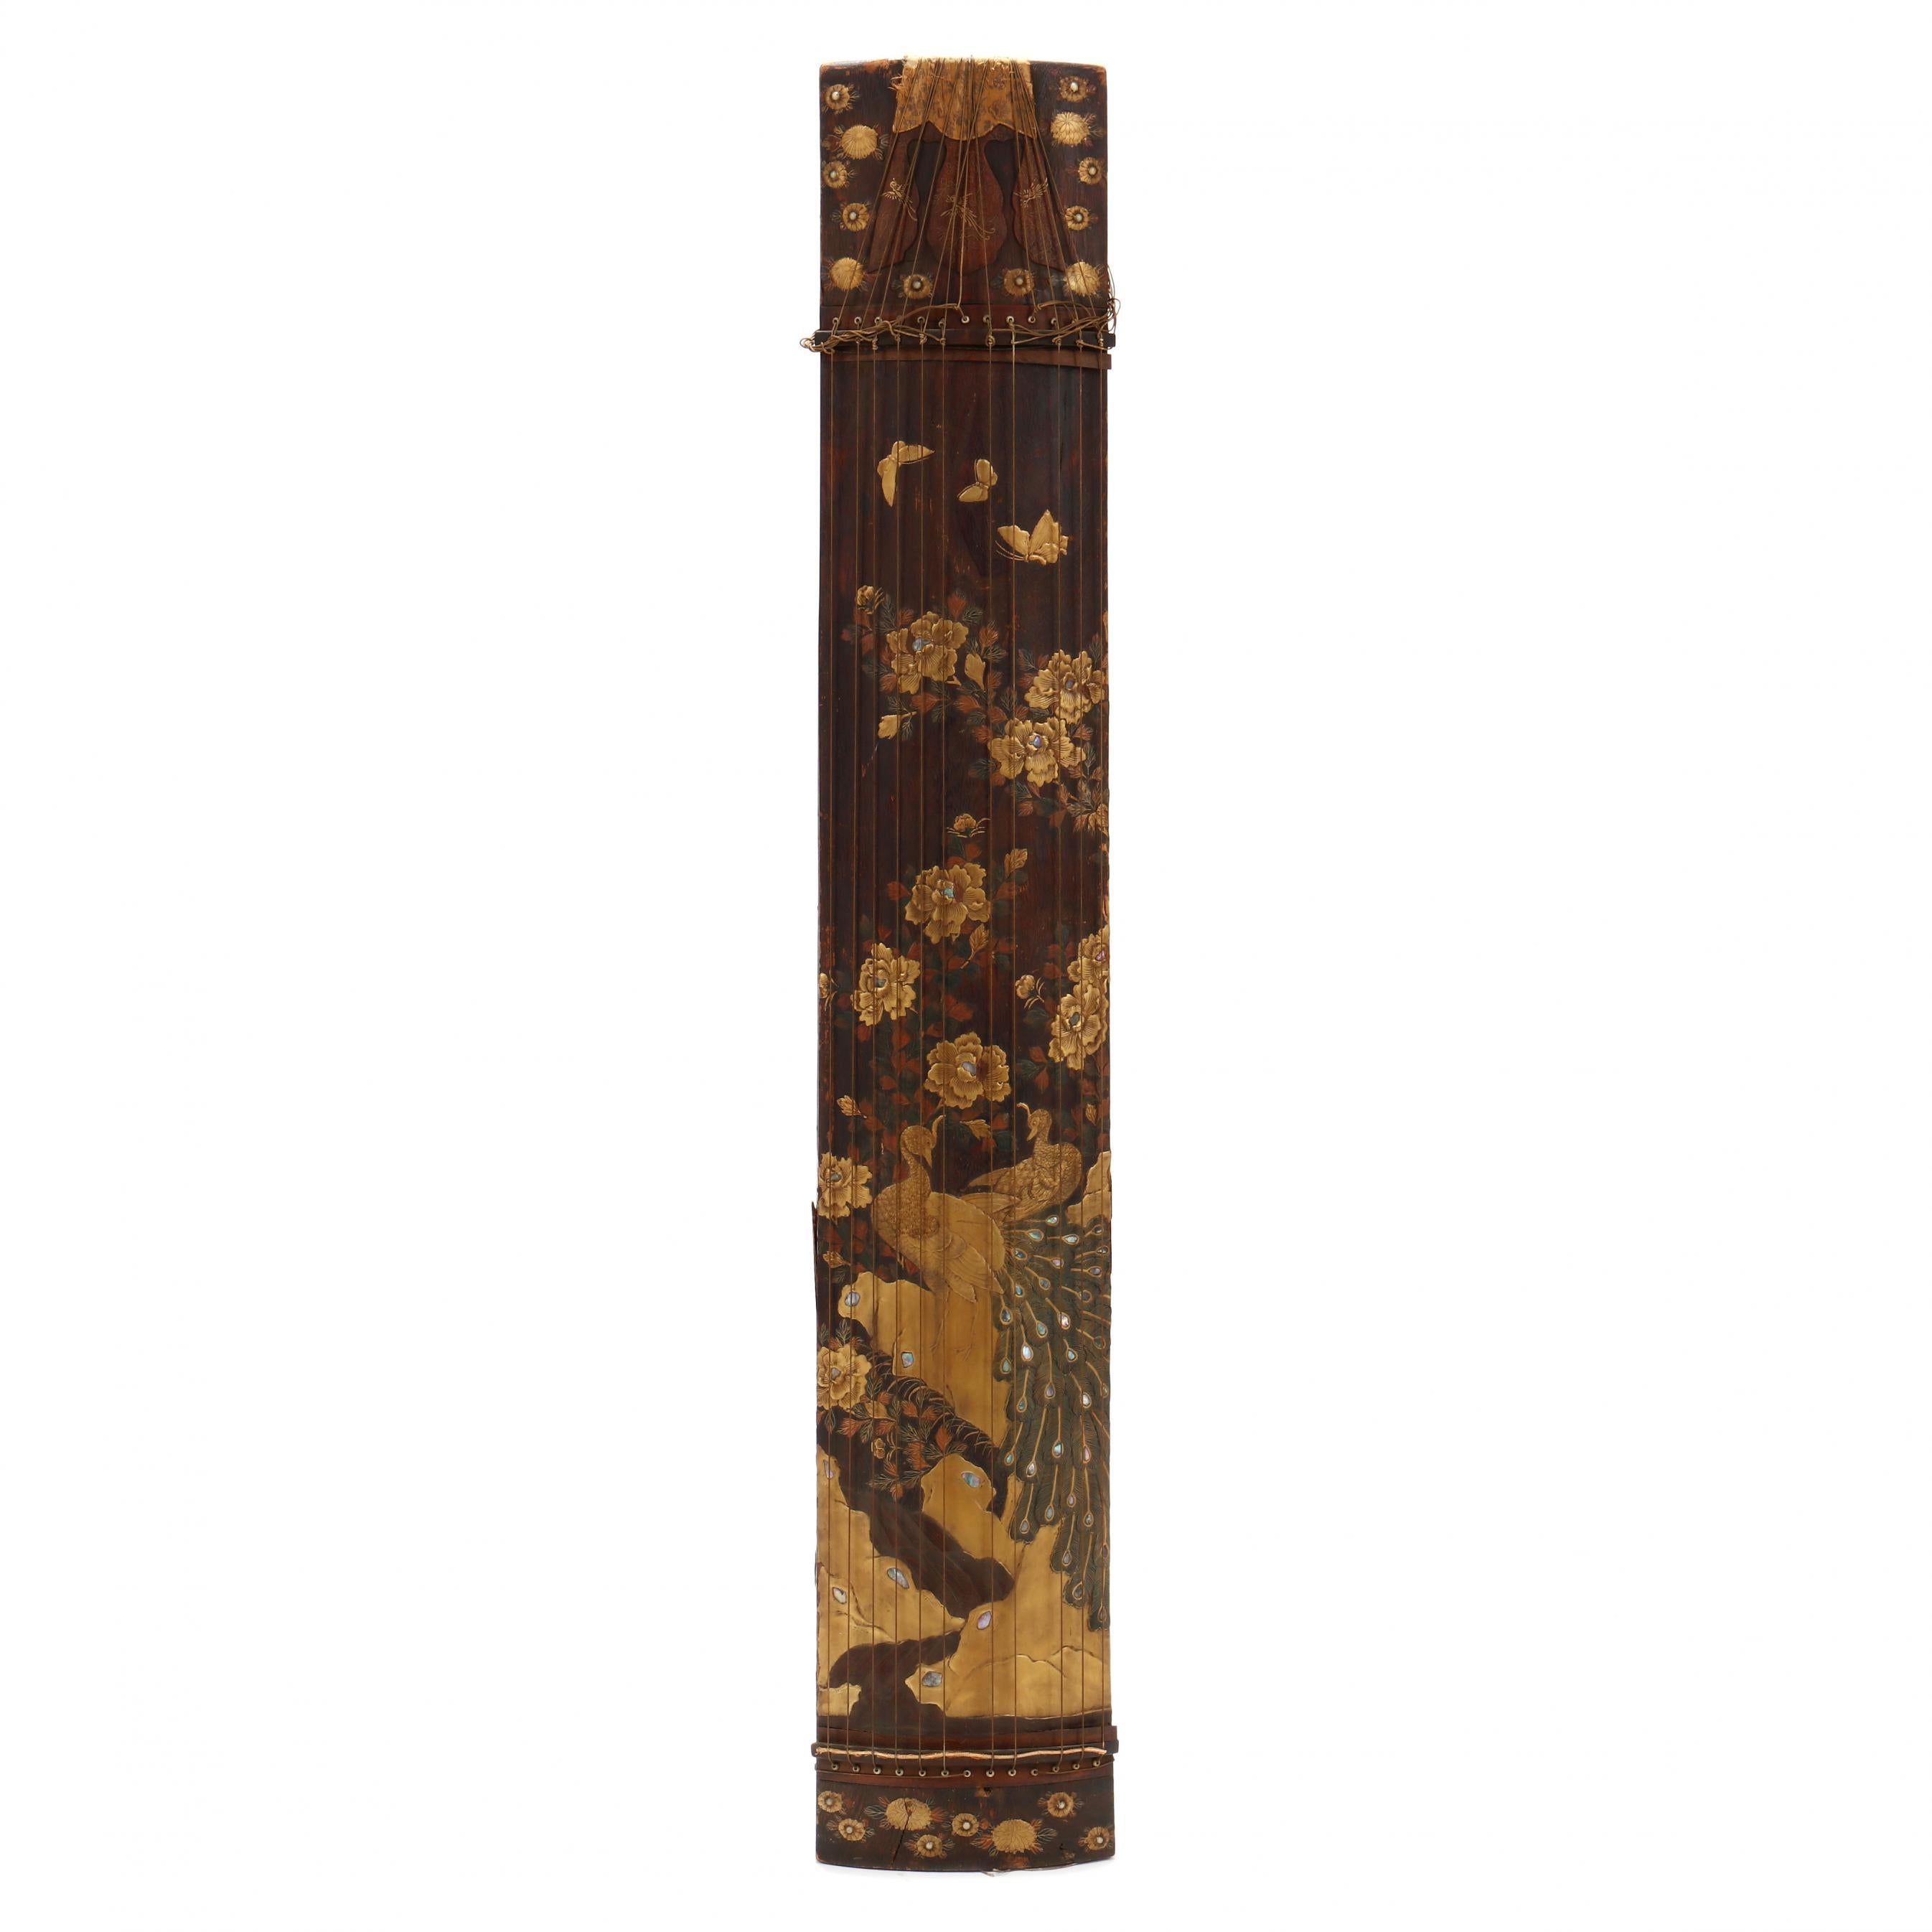 A rare Japanese Koto made from carved Paulownia wood and lavishly decorated with lacquer Maki-e circa late 19th century of Meiji Period (1868-1912). The facade of the stringed instrument features beautiful gold takamaki-e and hiramaki-e decoration.